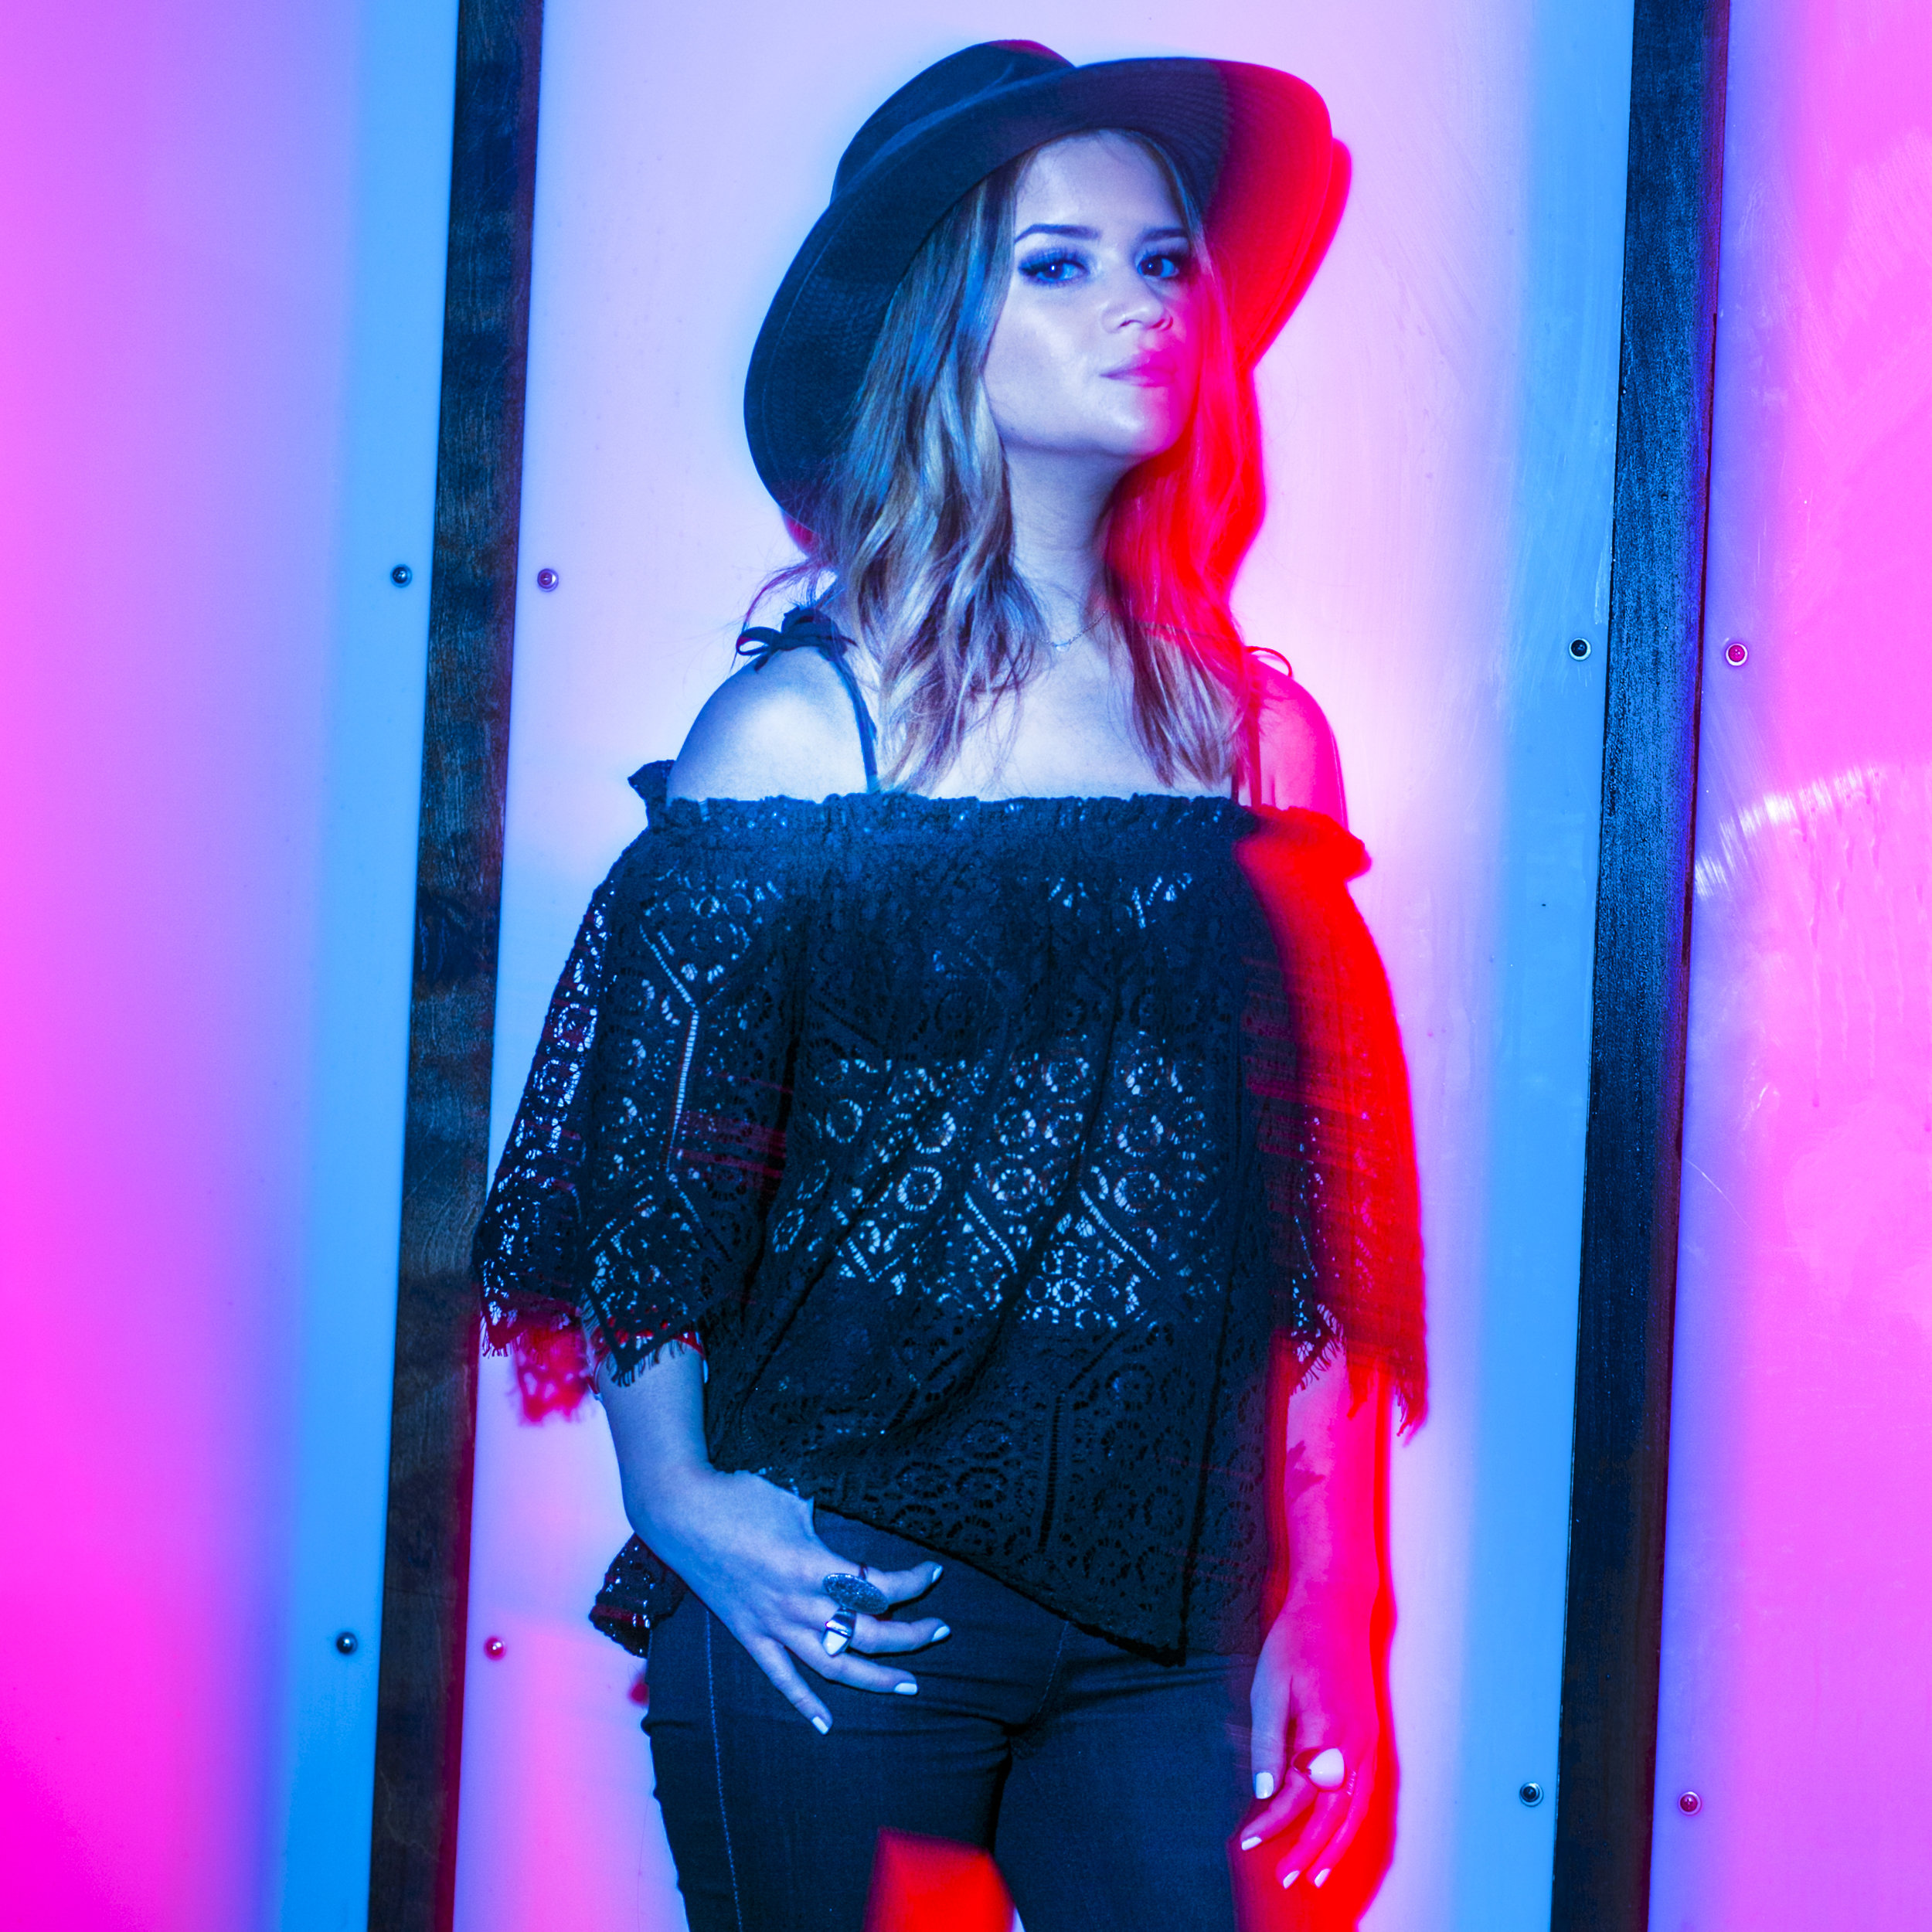  Maren Morris for The Fort Worth Star-Telegram at South By Southwest, March 17, 2016. 